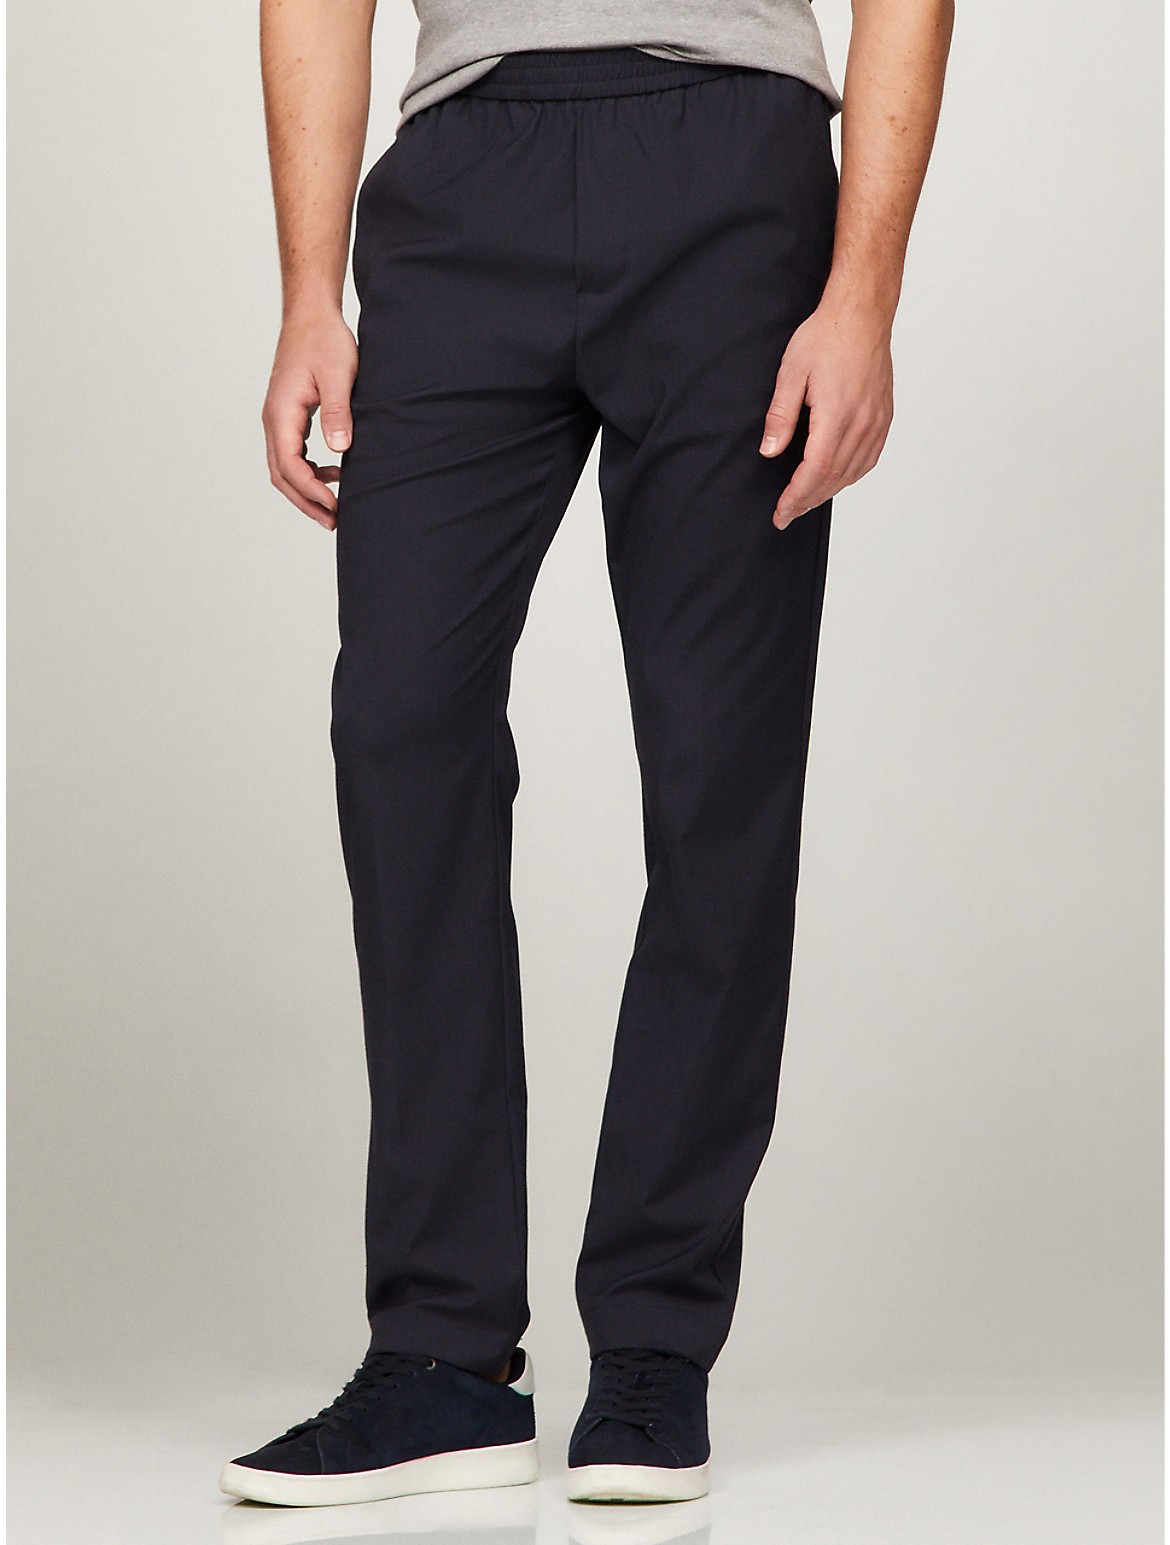 Tommy Hilfiger Regular Fit Solid Stretch Pant In Navy